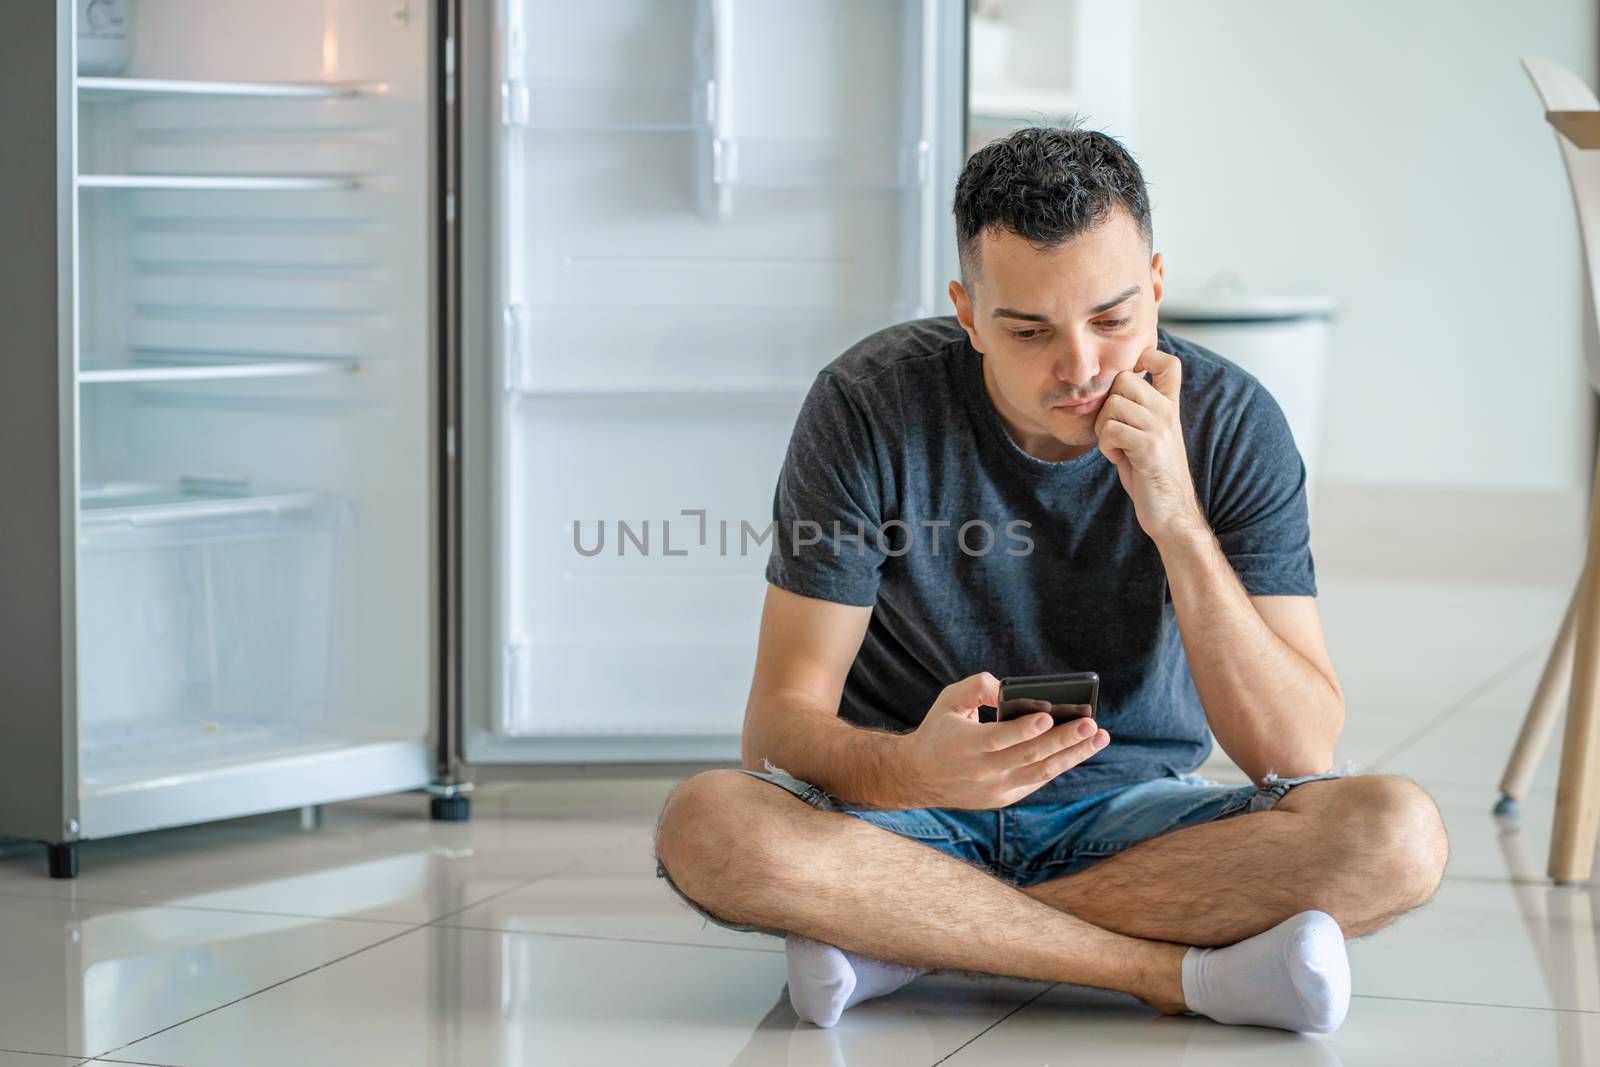 A young guy orders food using a smartphone. Empty refrigerator with no food. Food delivery service advertisement.